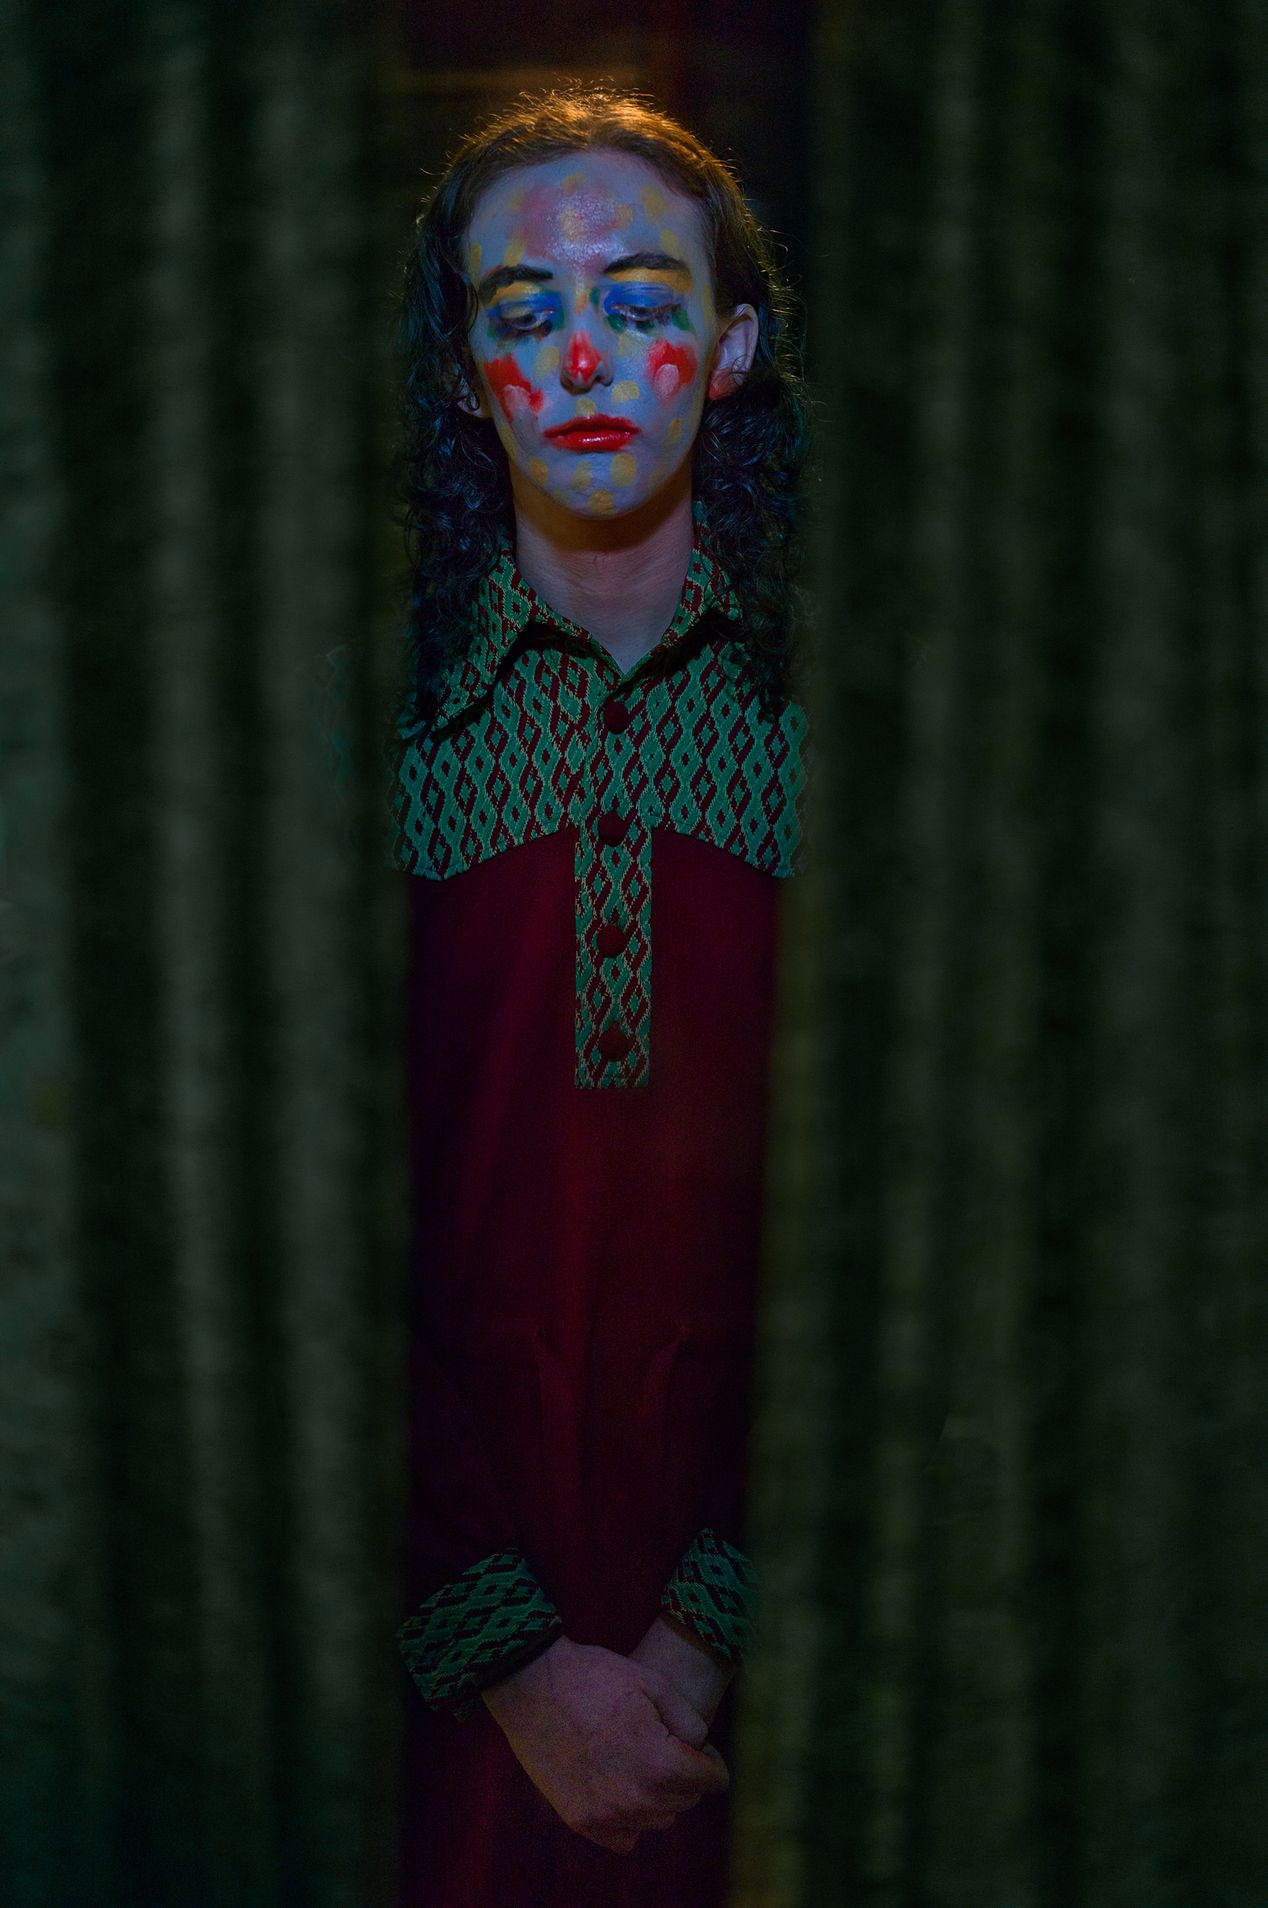 Woman with painted face standing in a hallway, editorial photography, Ilona Szwarc, Los Angeles portrait photographer.